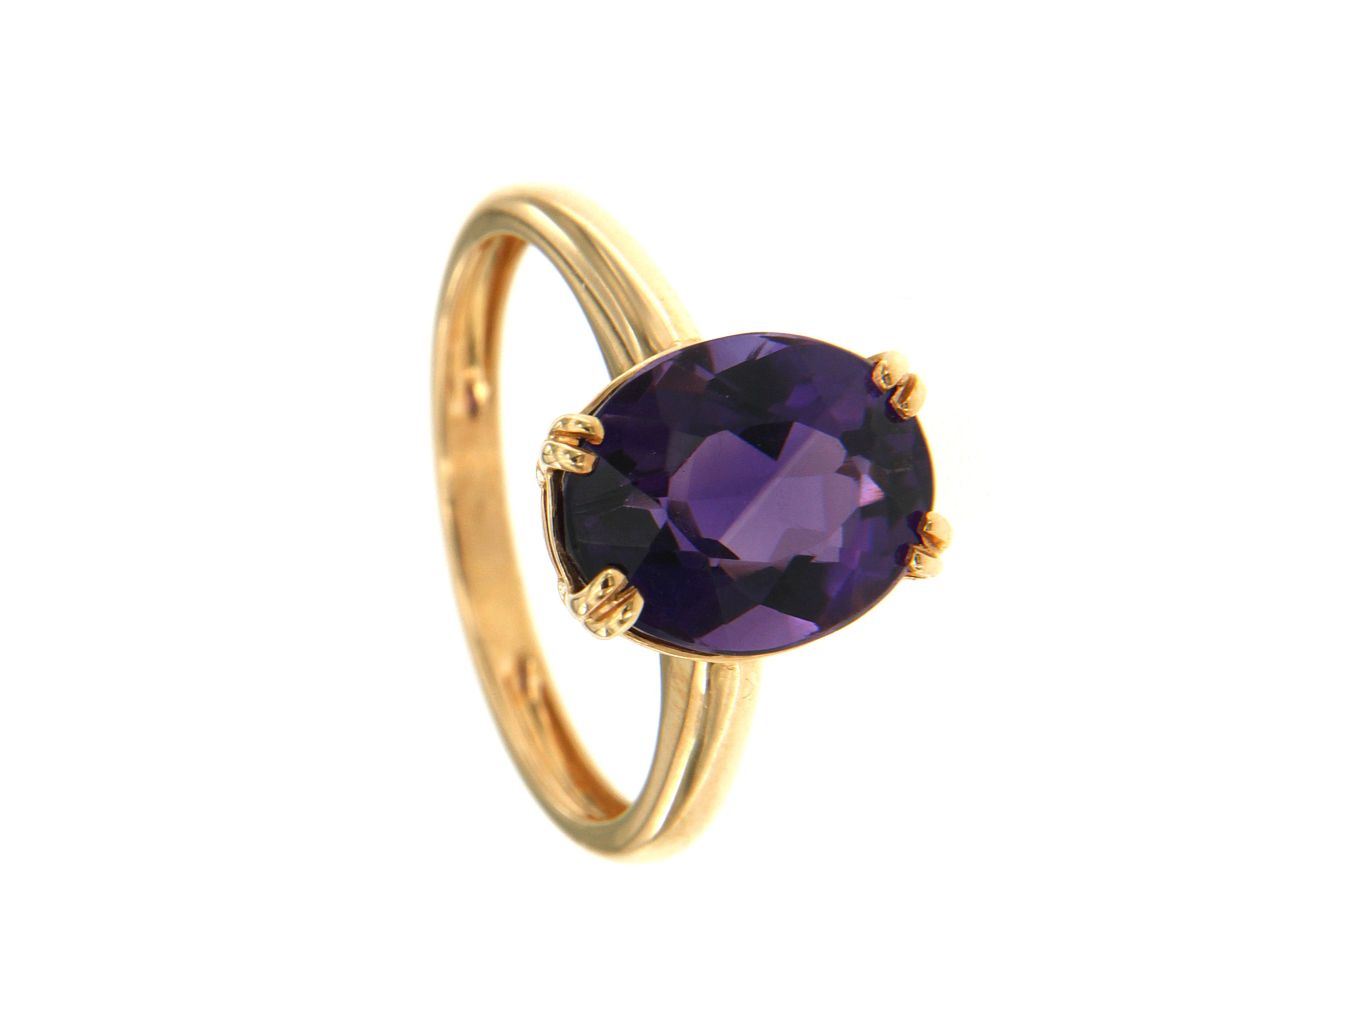 Ring Rotgold 750 mit Amethyst